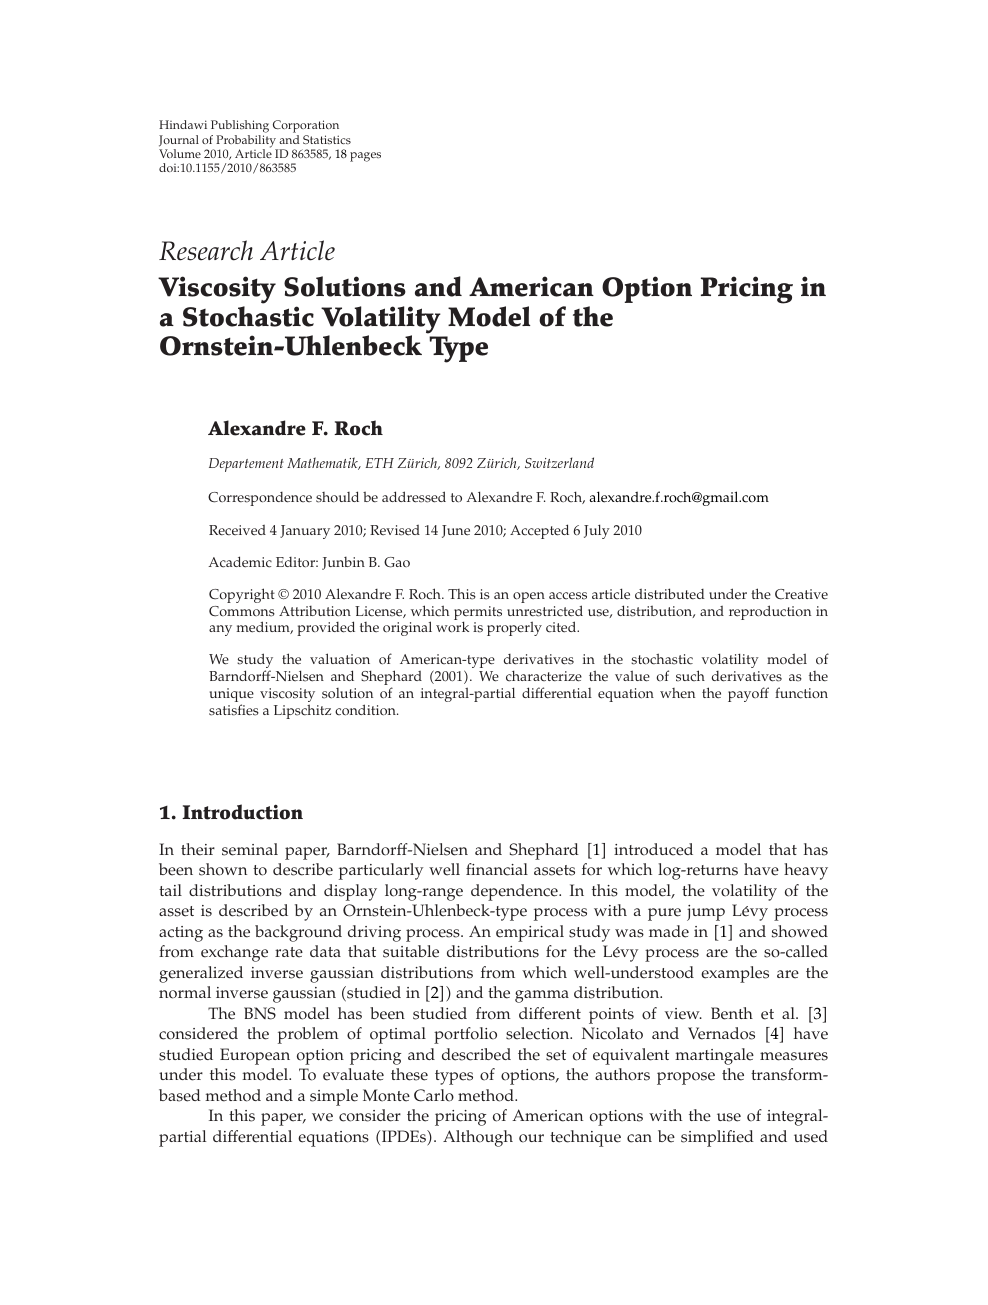 Viscosity Solutions And American Option Pricing In A Stochastic Volatility Model Of The Ornstein Uhlenbeck Type Topic Of Research Paper In Mathematics Download Scholarly Article Pdf And Read For Free On Cyberleninka